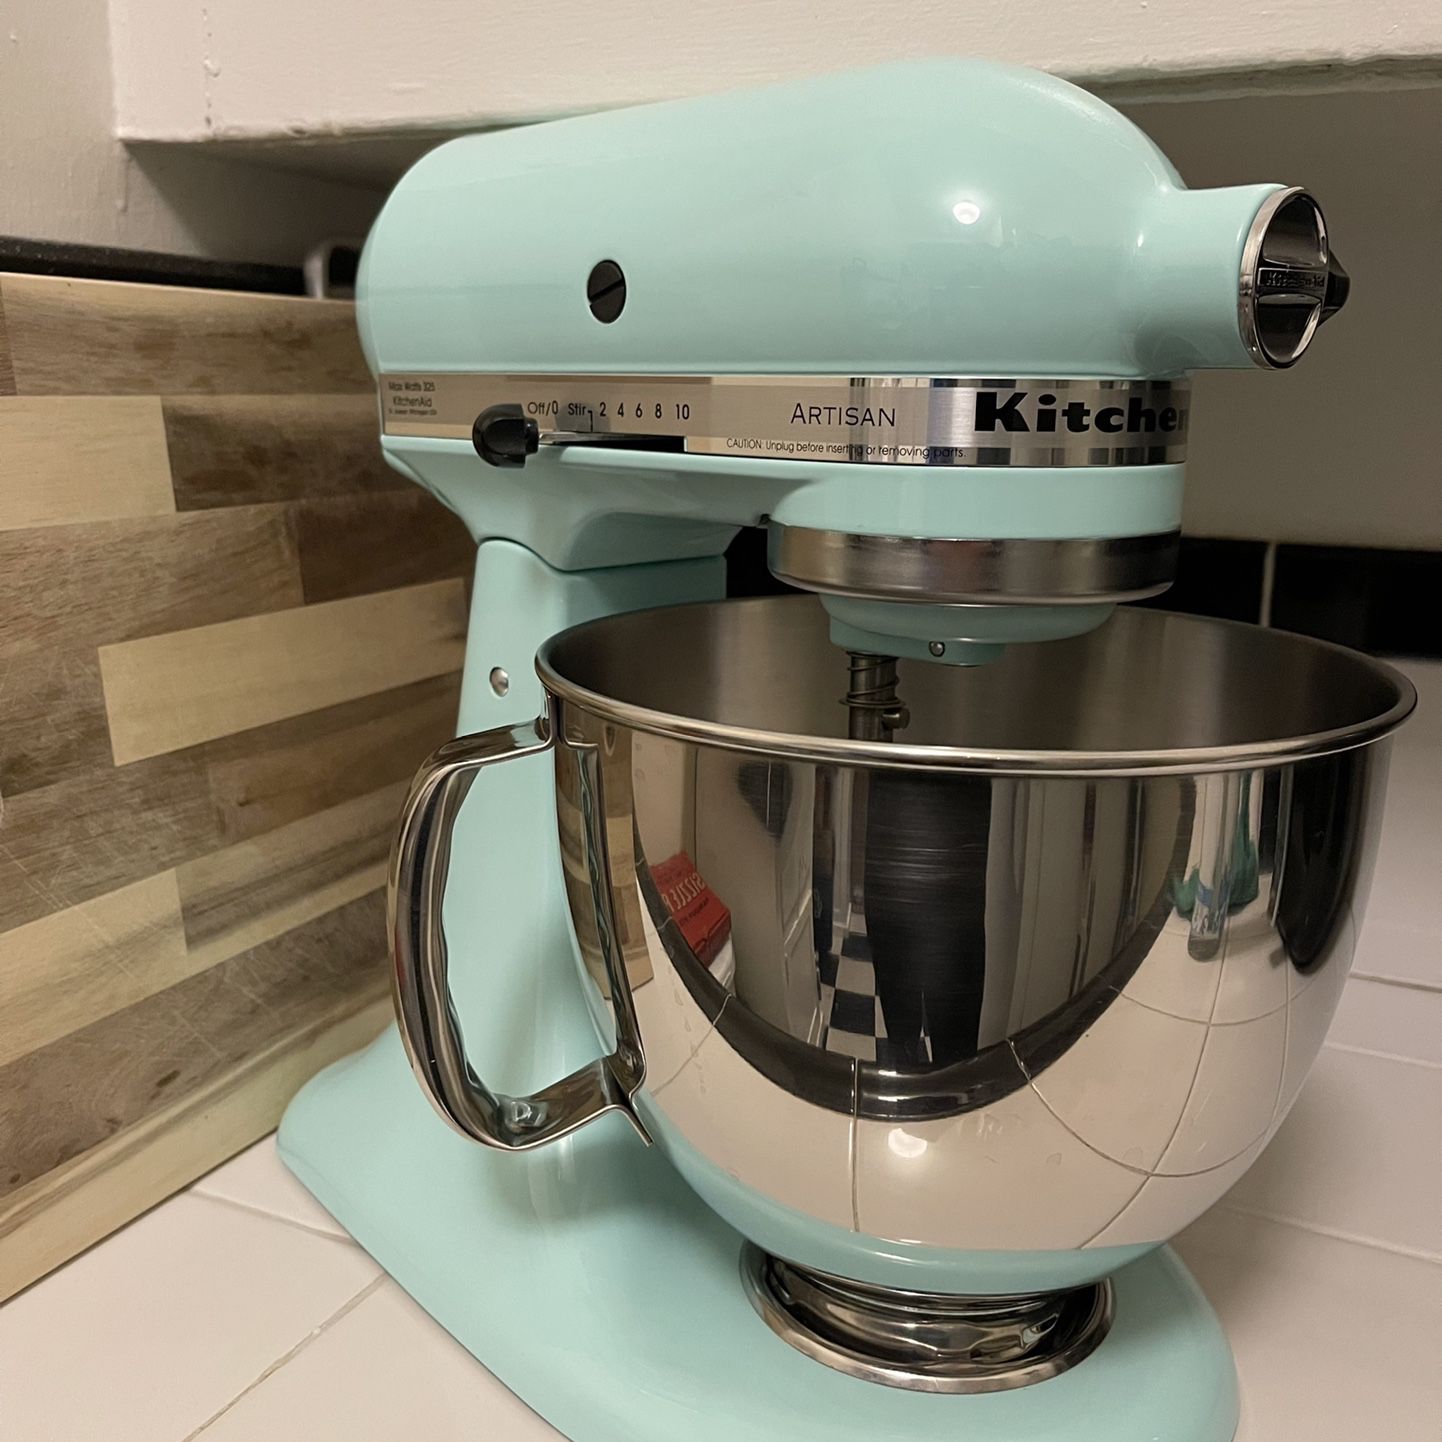 KitchenAid Stand for in Portland, OR - OfferUp